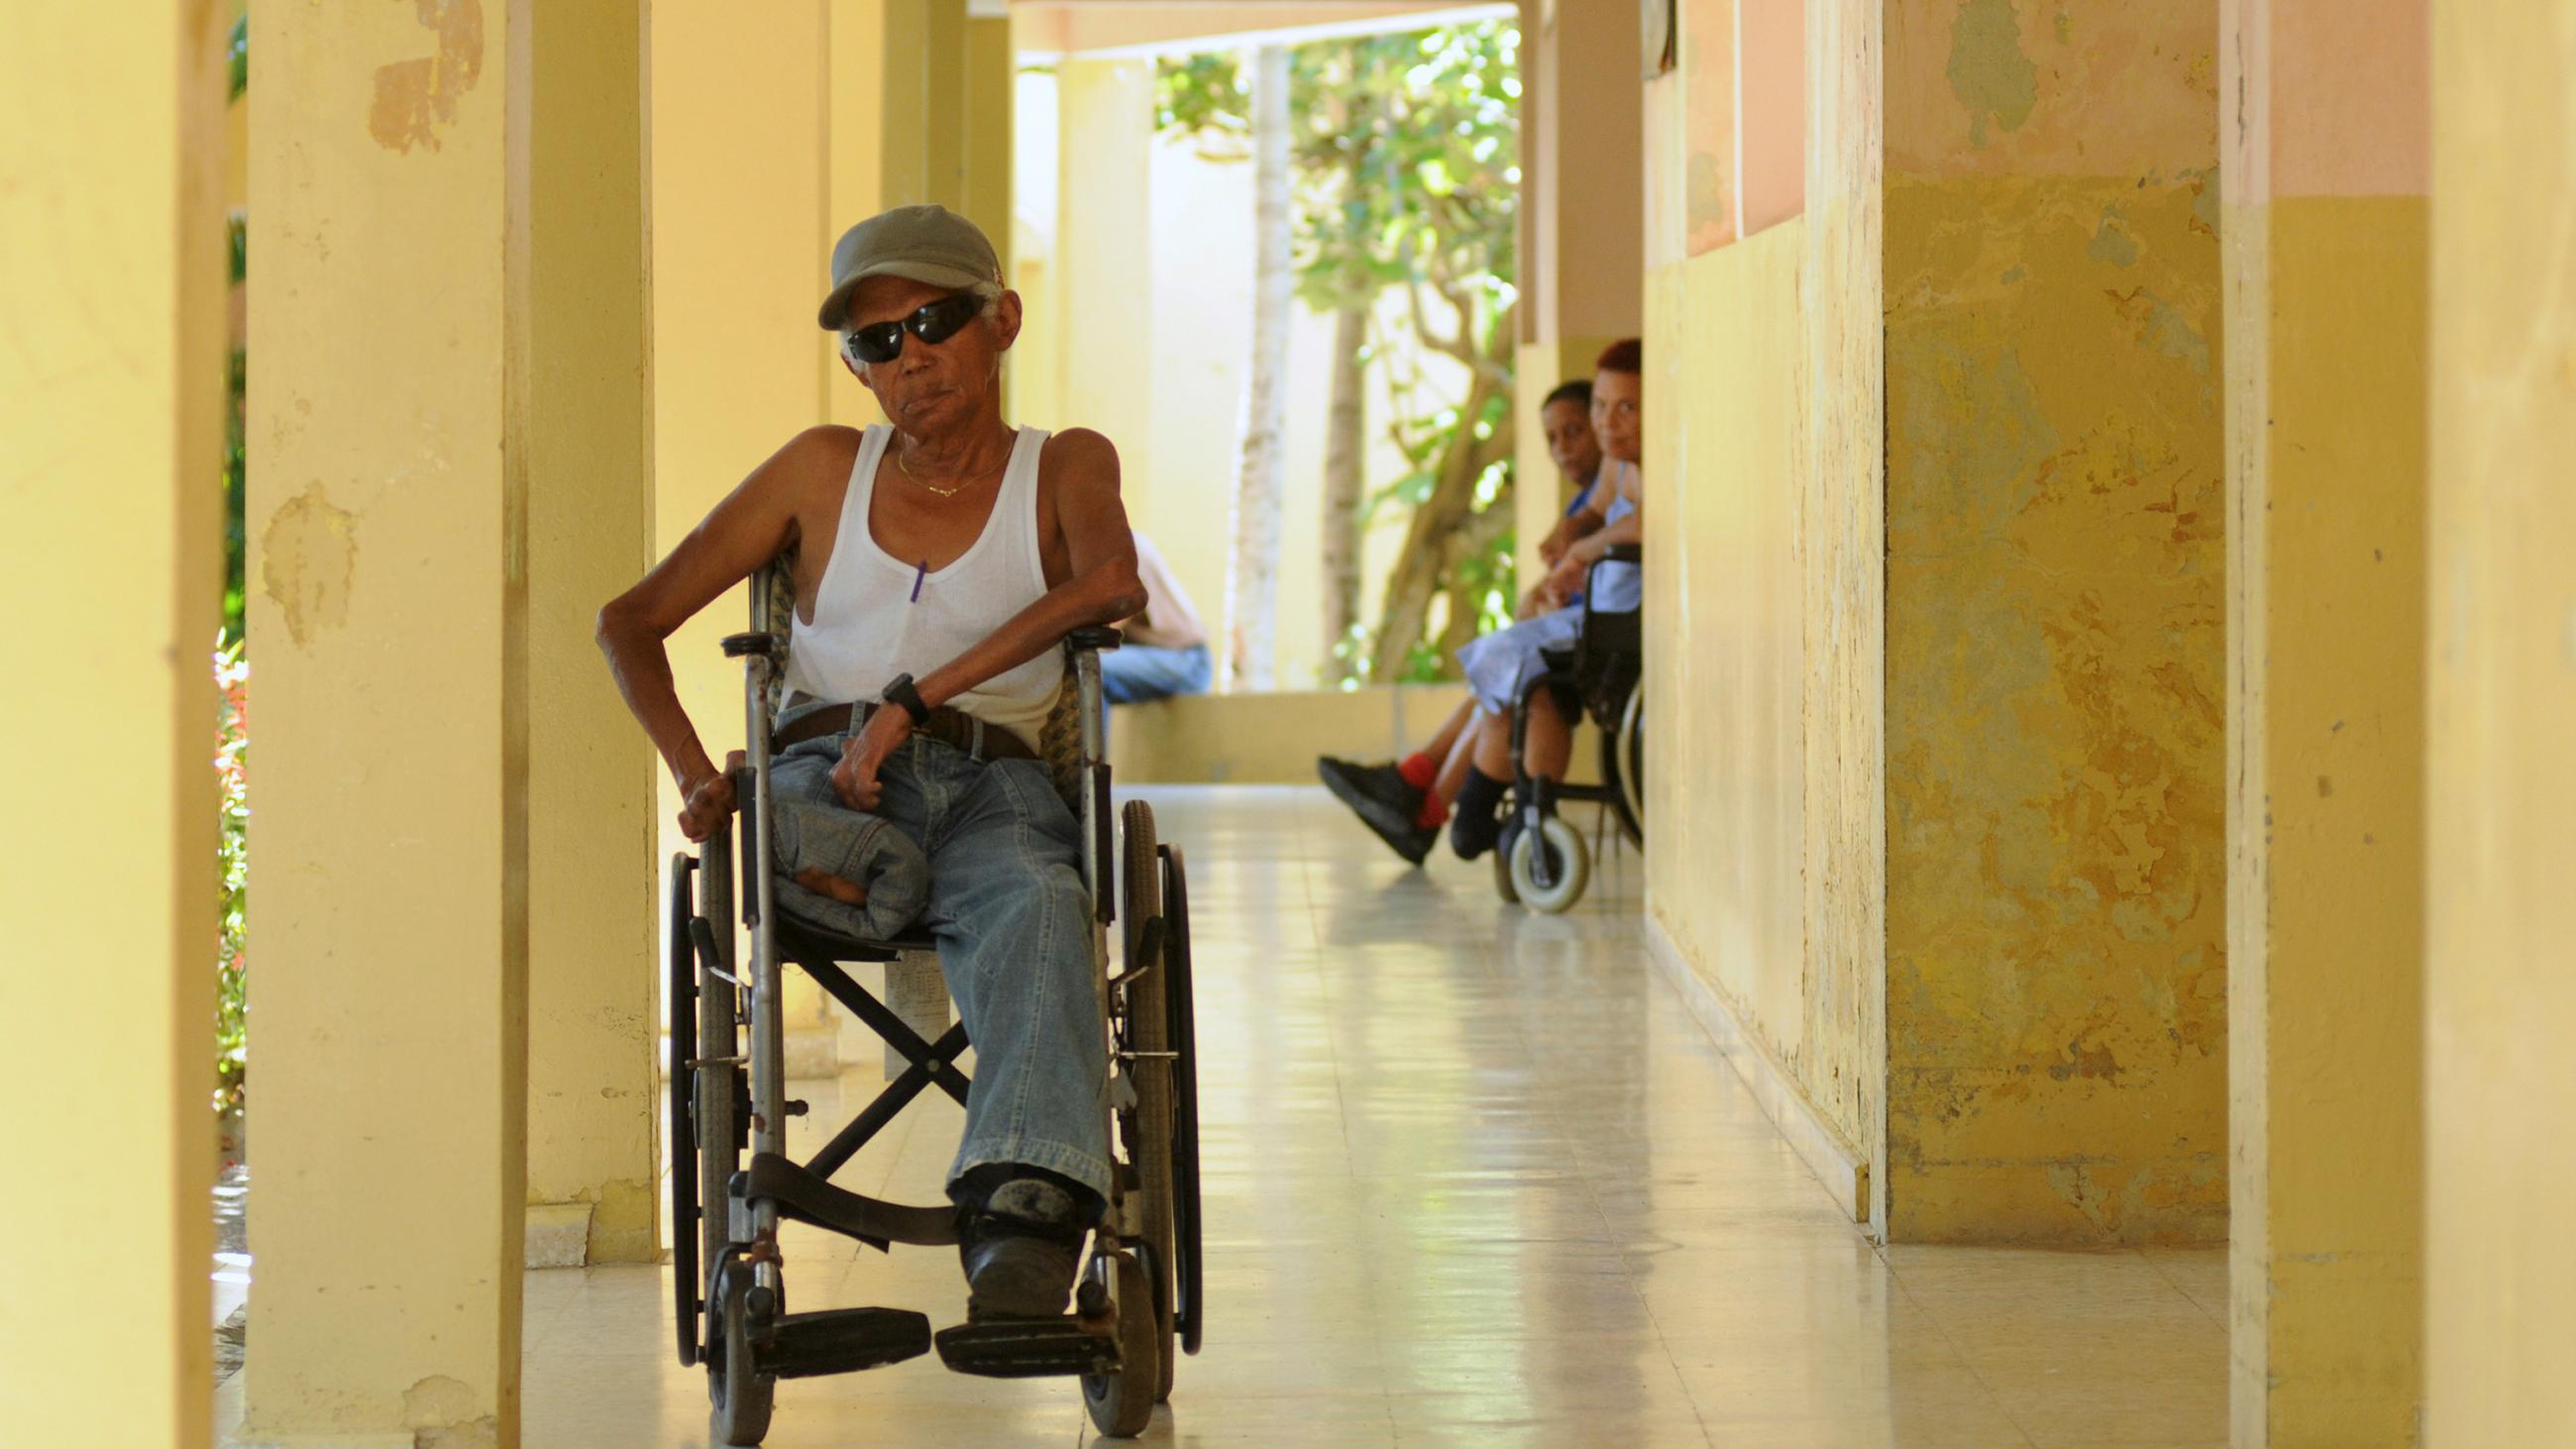 Picture shows Domingo in a wheelchair wearing dark shades and a white tank top. It appears to be a warm summer day. 